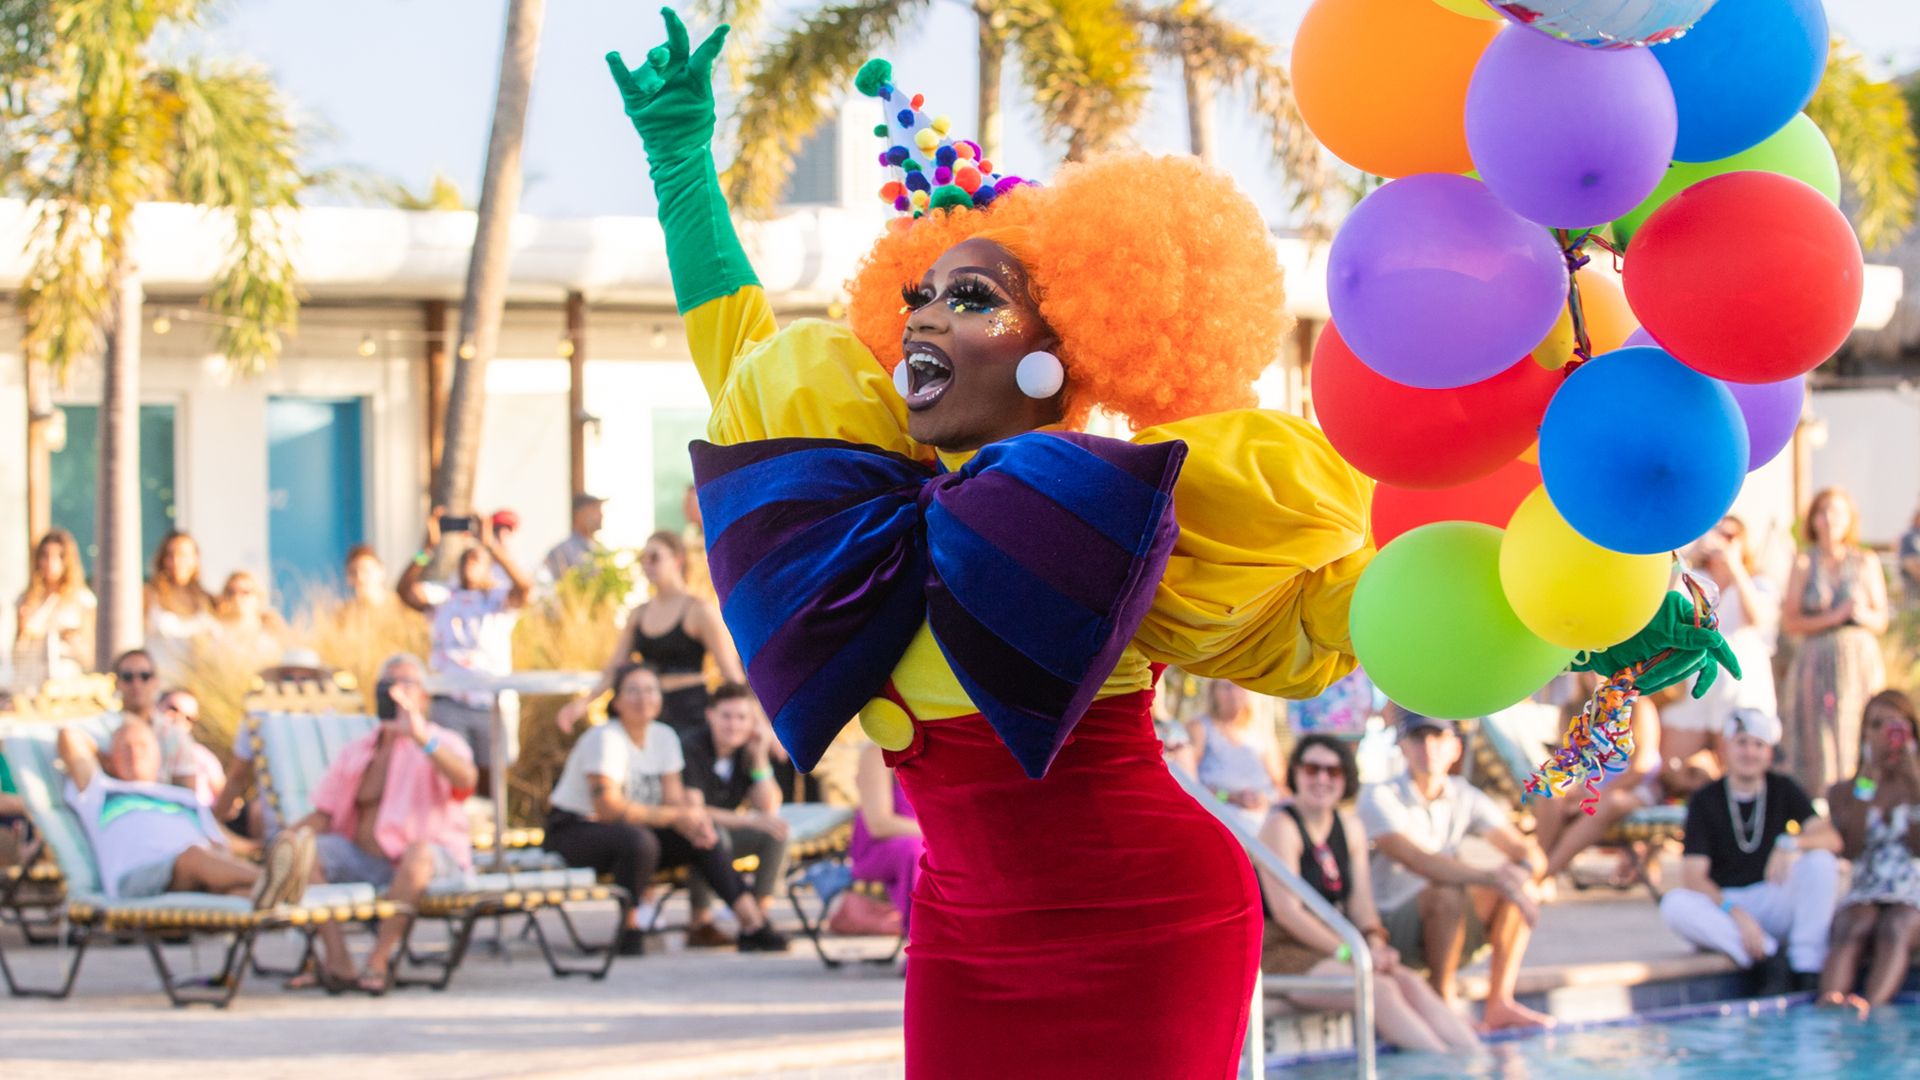 A drag queen dressed as a clown holding balloons